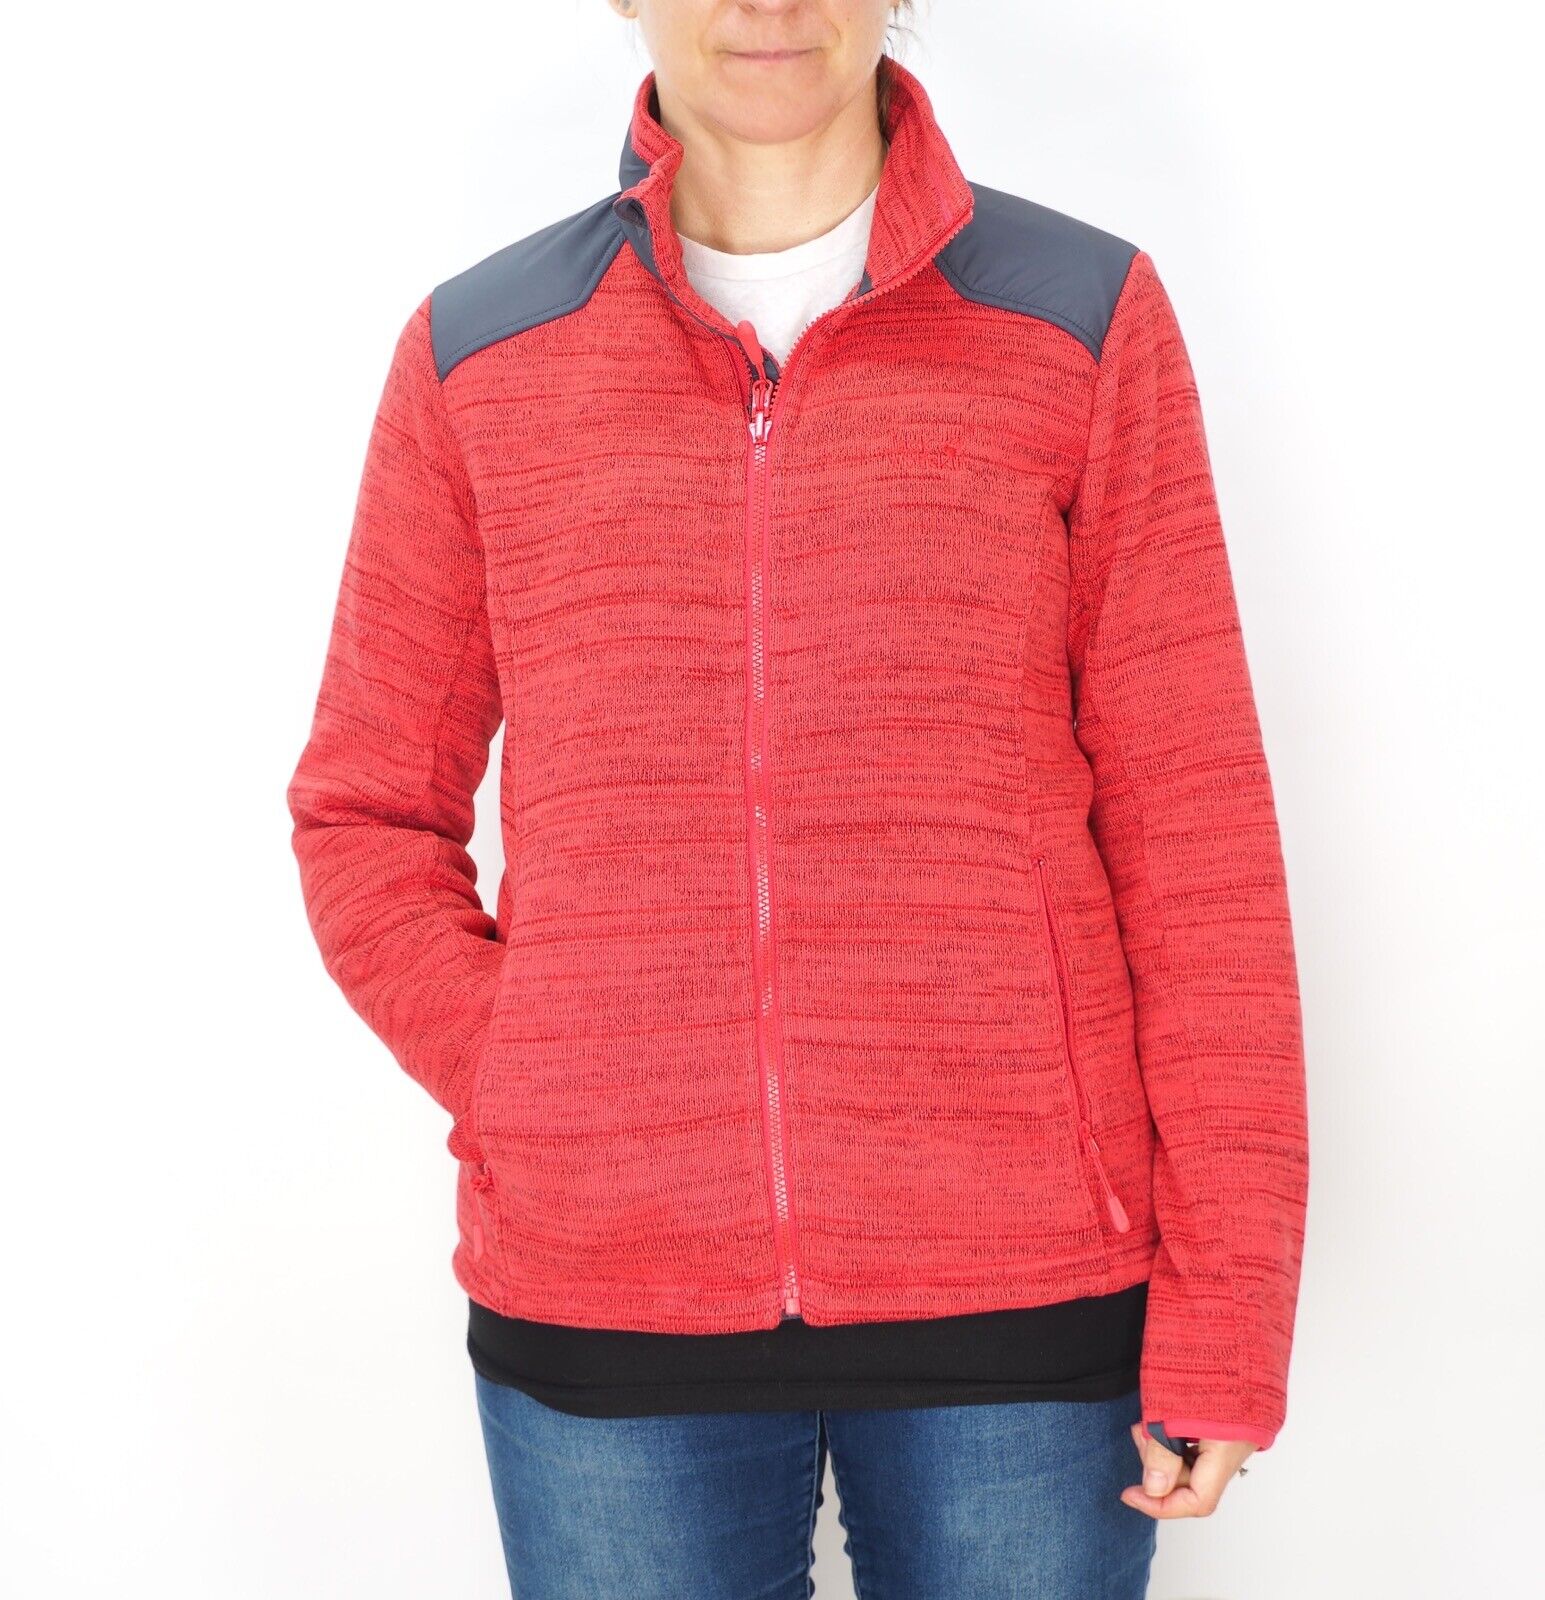 Womens Jack Wolfskin Aquila 1705921 Tulip Red Zip Up Light Breathable Jacket - London Top Style